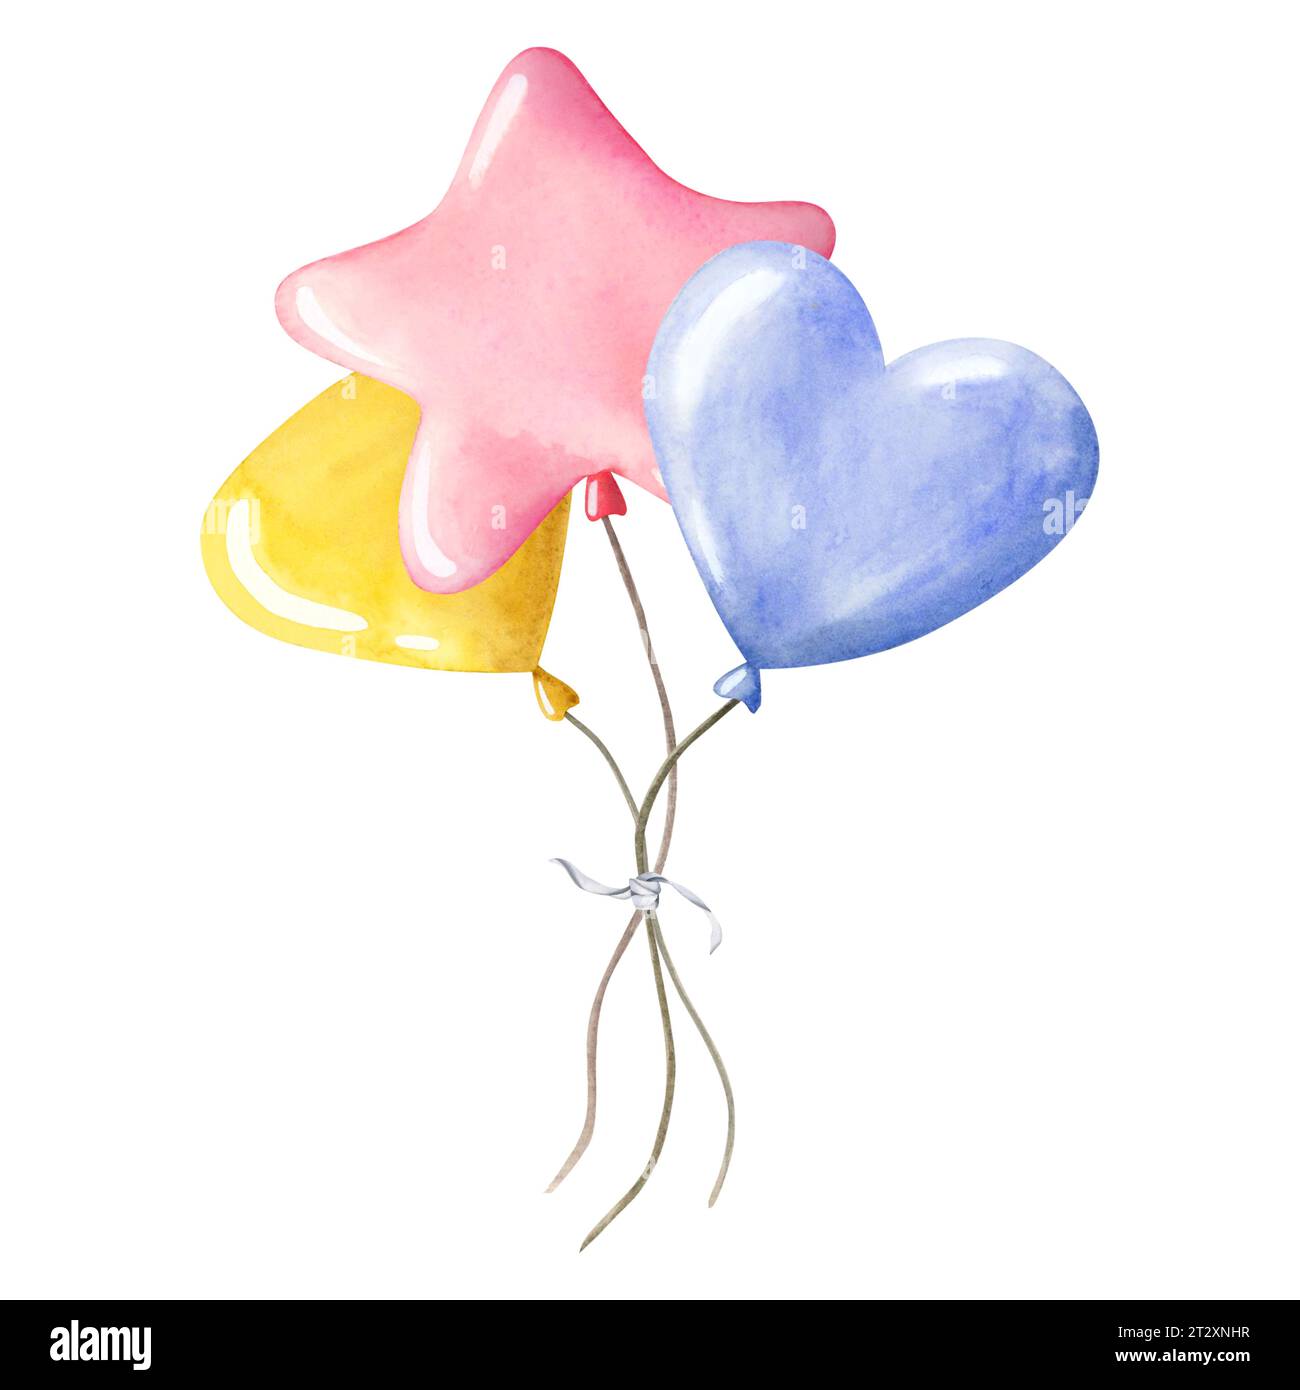 Pastel pink, lavender blue and yellow air balloons bouquet for kids birthday party watercolor illustration isolated on white background. Hand drawn cl Stock Photo